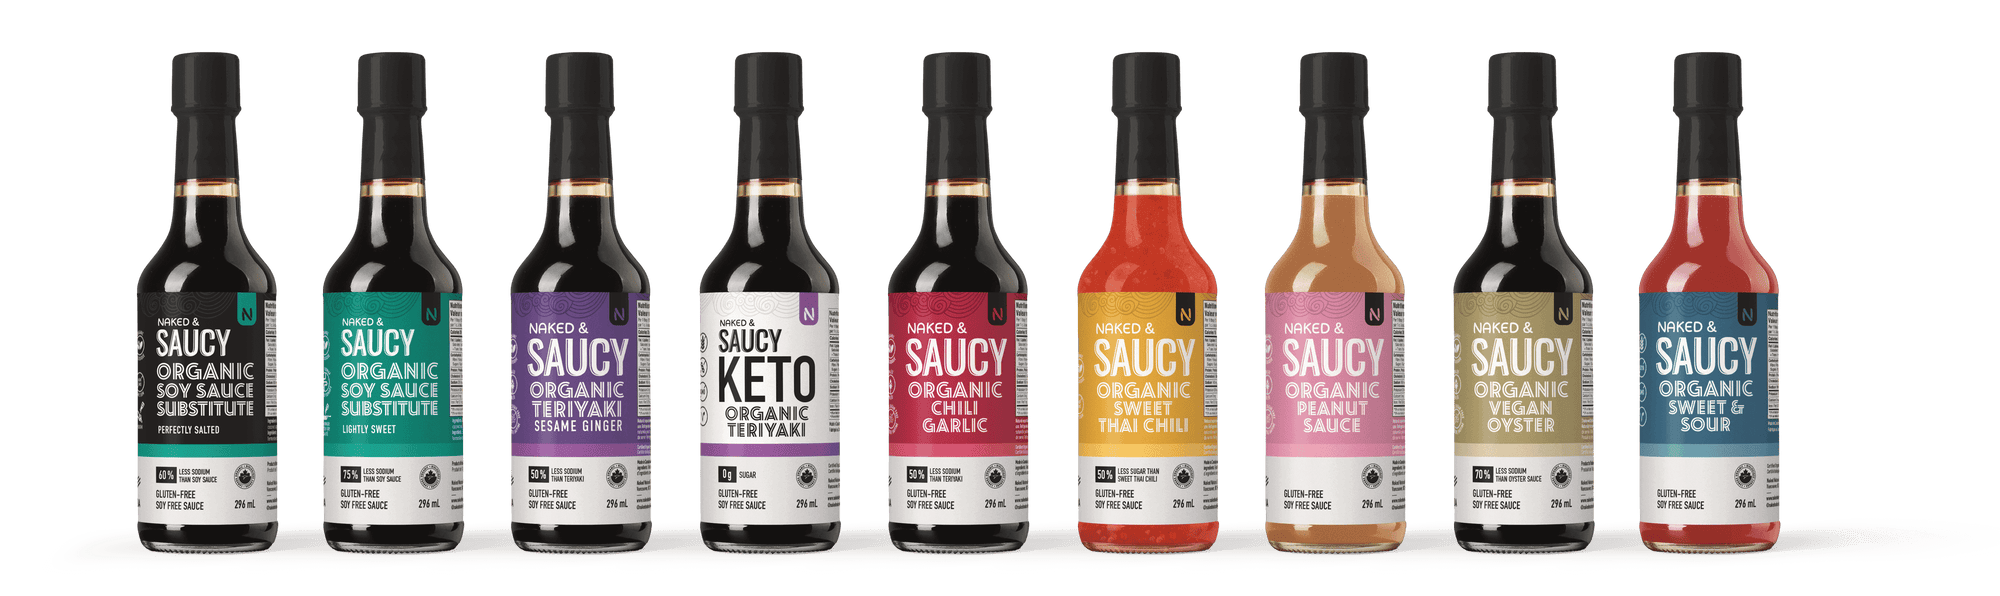 Nine sauces are lined up. From left to right the order is: Coconut Aminos - Perfectly Salted, Coconut Aminos - Lightly Sweet, Teriyaki Sesame Ginger, Keto Teriyaki, Chili Garlic, Sweet Thai Chili, Peanut, Vegan Oyster, Sweet and Sour